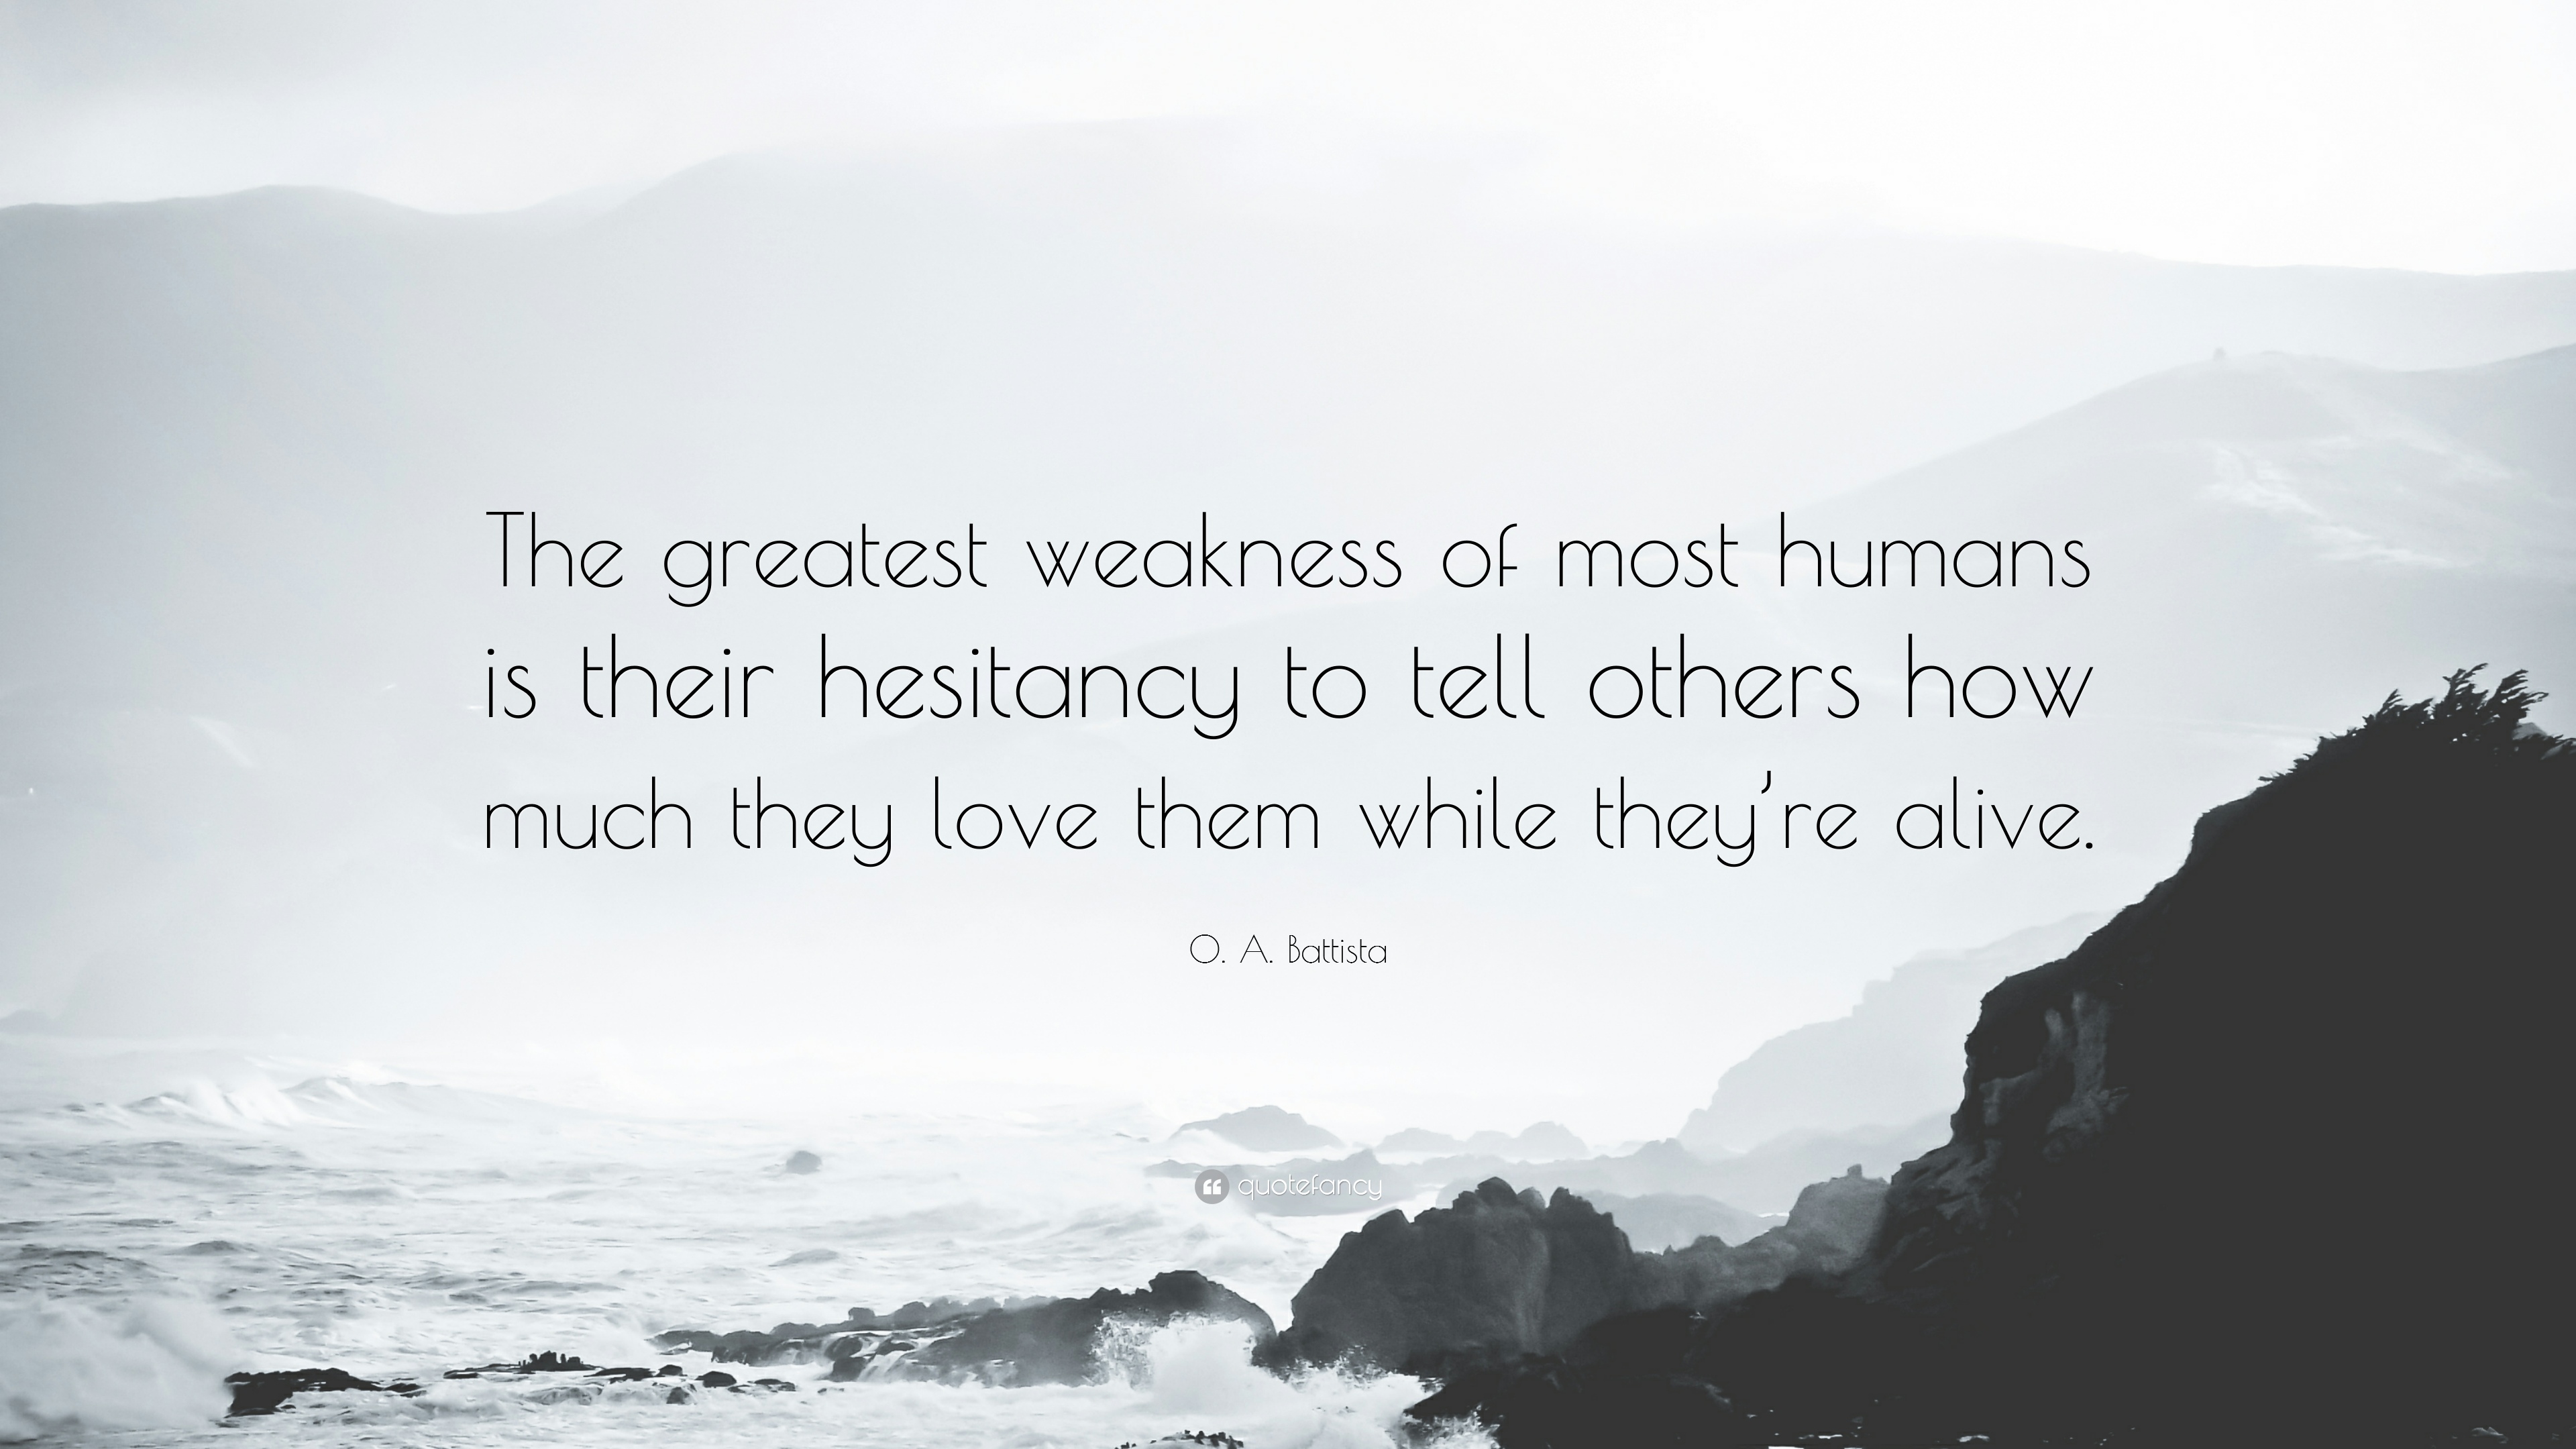 O. A. Battista Quote: “The greatest weakness of most humans is their